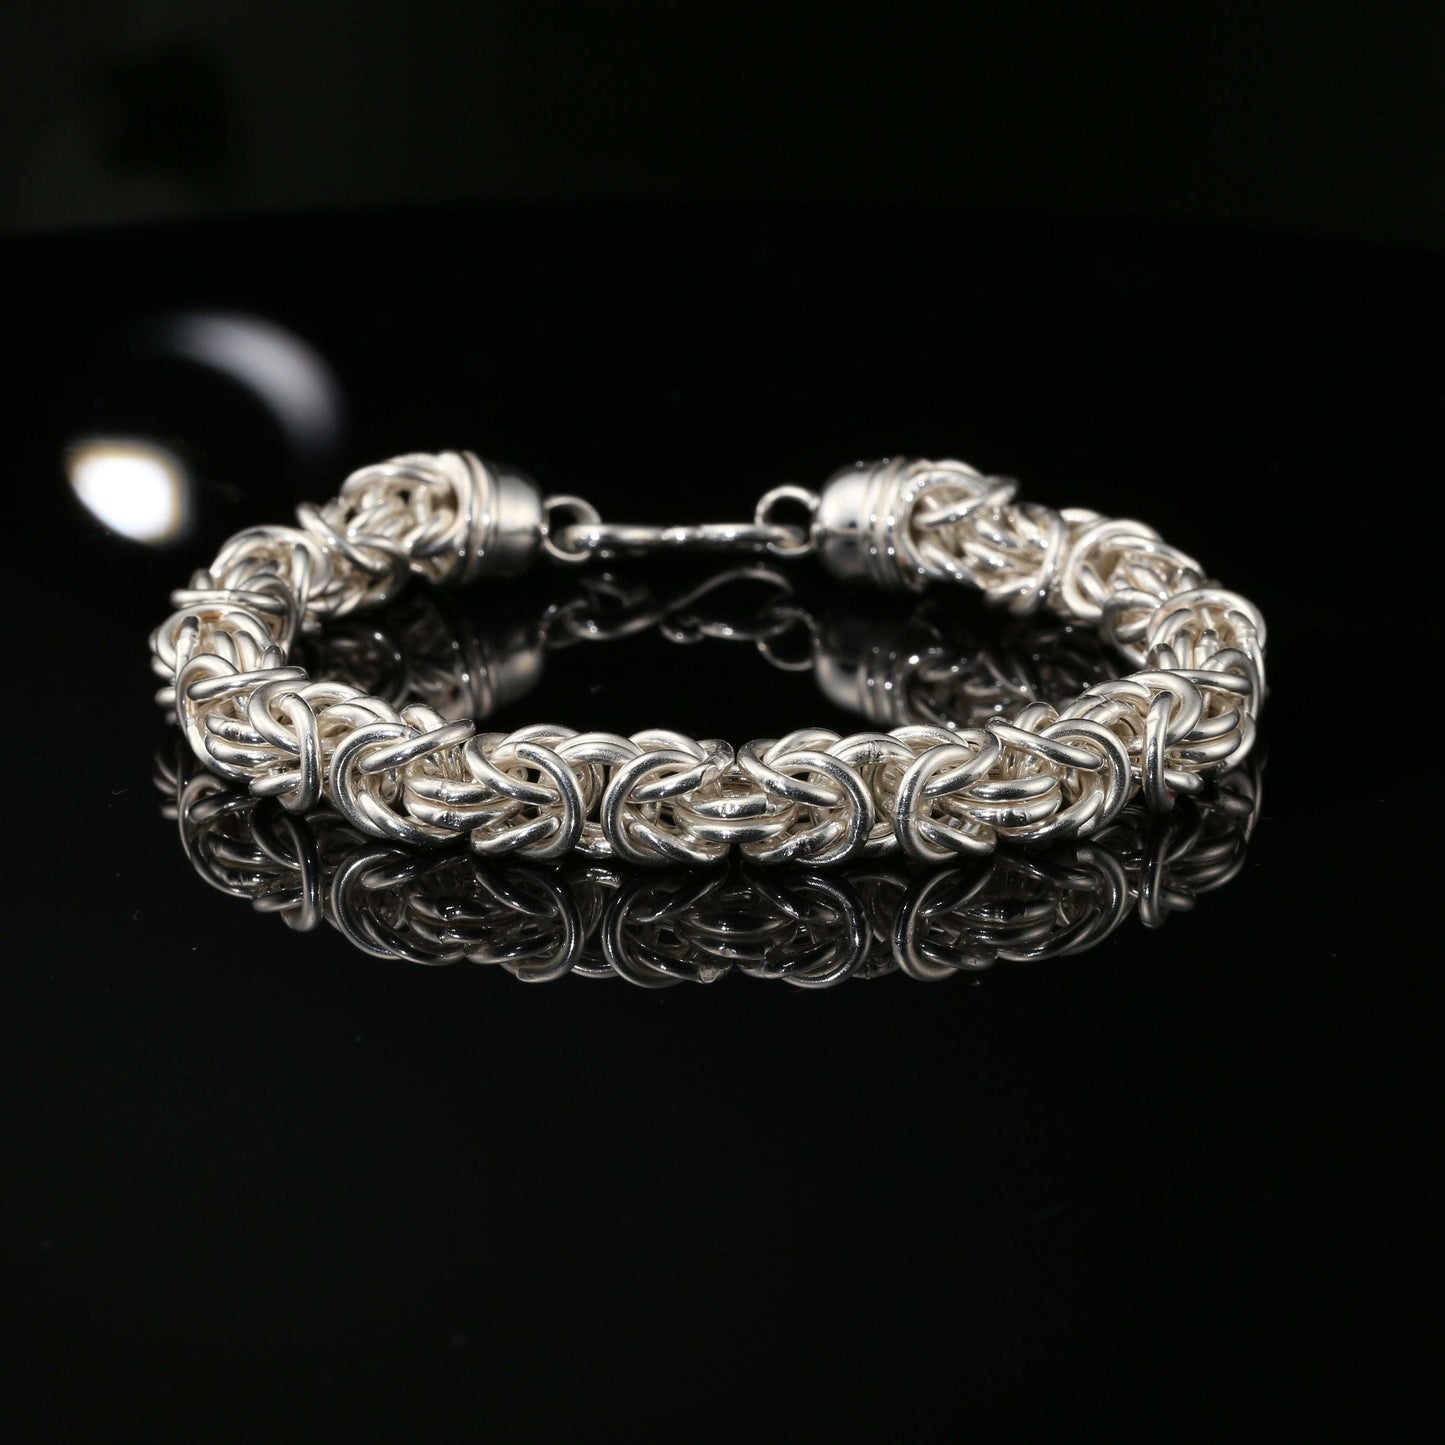 Sterling Silver Handmade Byzantine Chain Bracelet with Hook Clasp, 8.75", Unisex